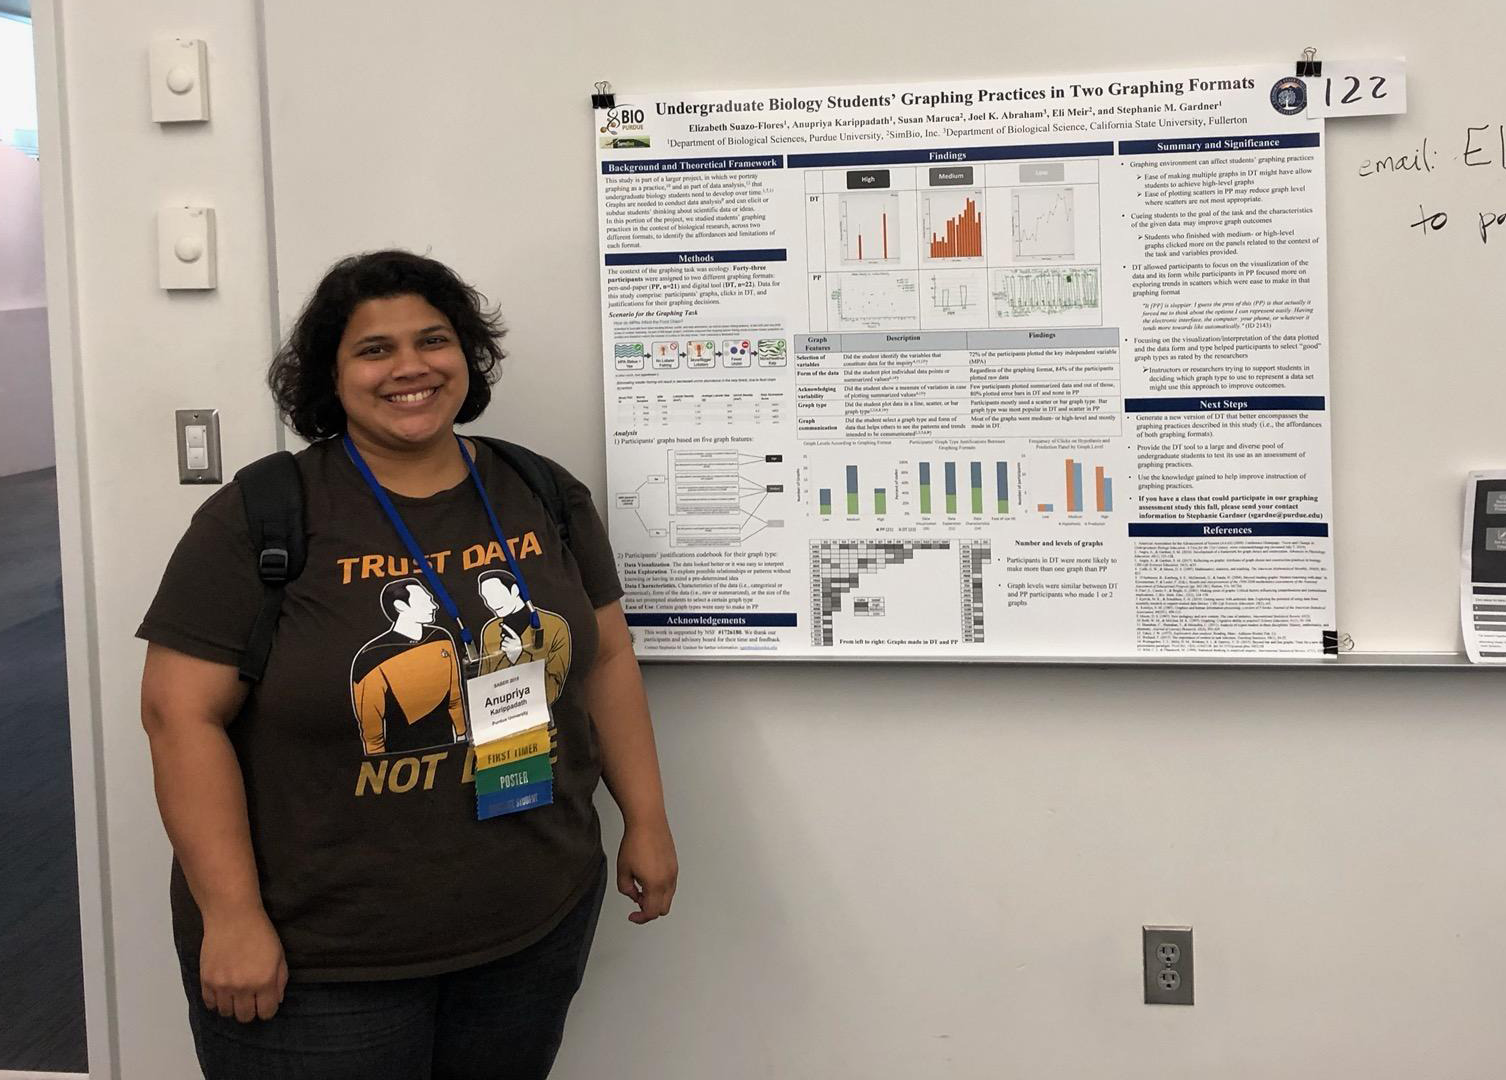 Anupriya standing next to her poster at the SABER conference